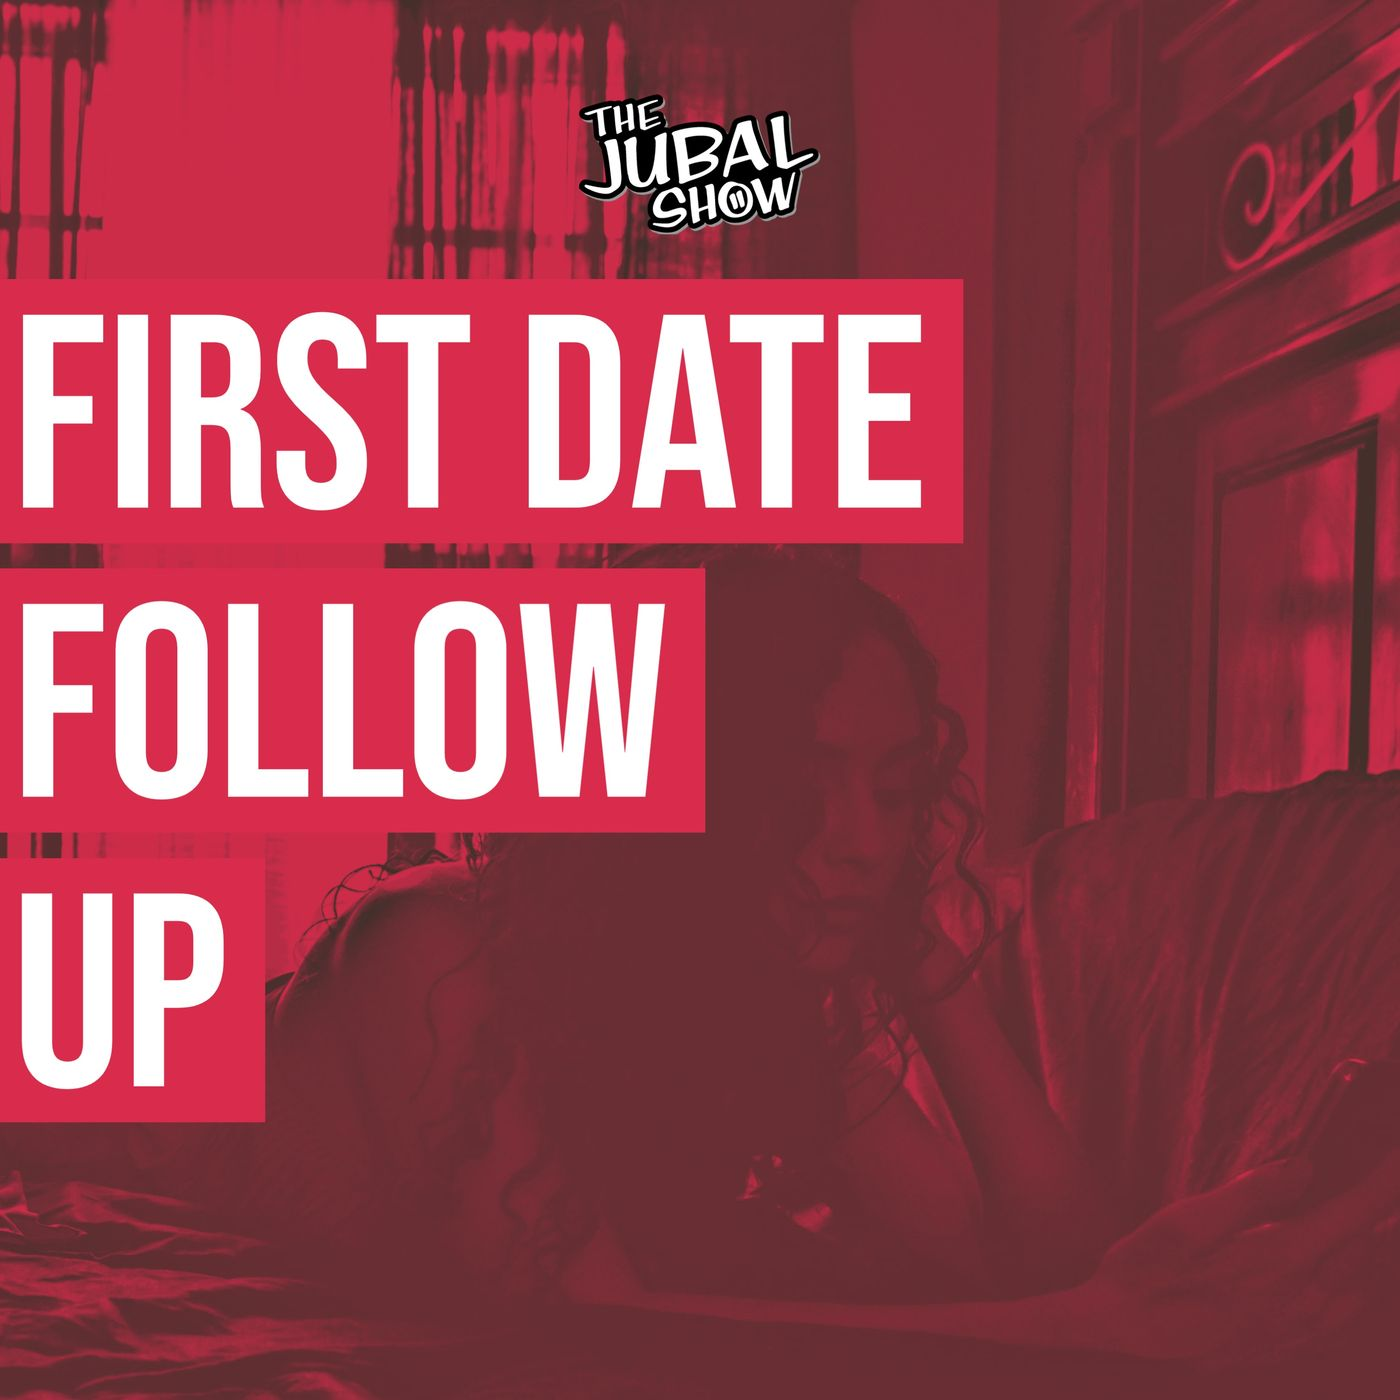 This First Date Follow Up proves you never really know who you're dating!